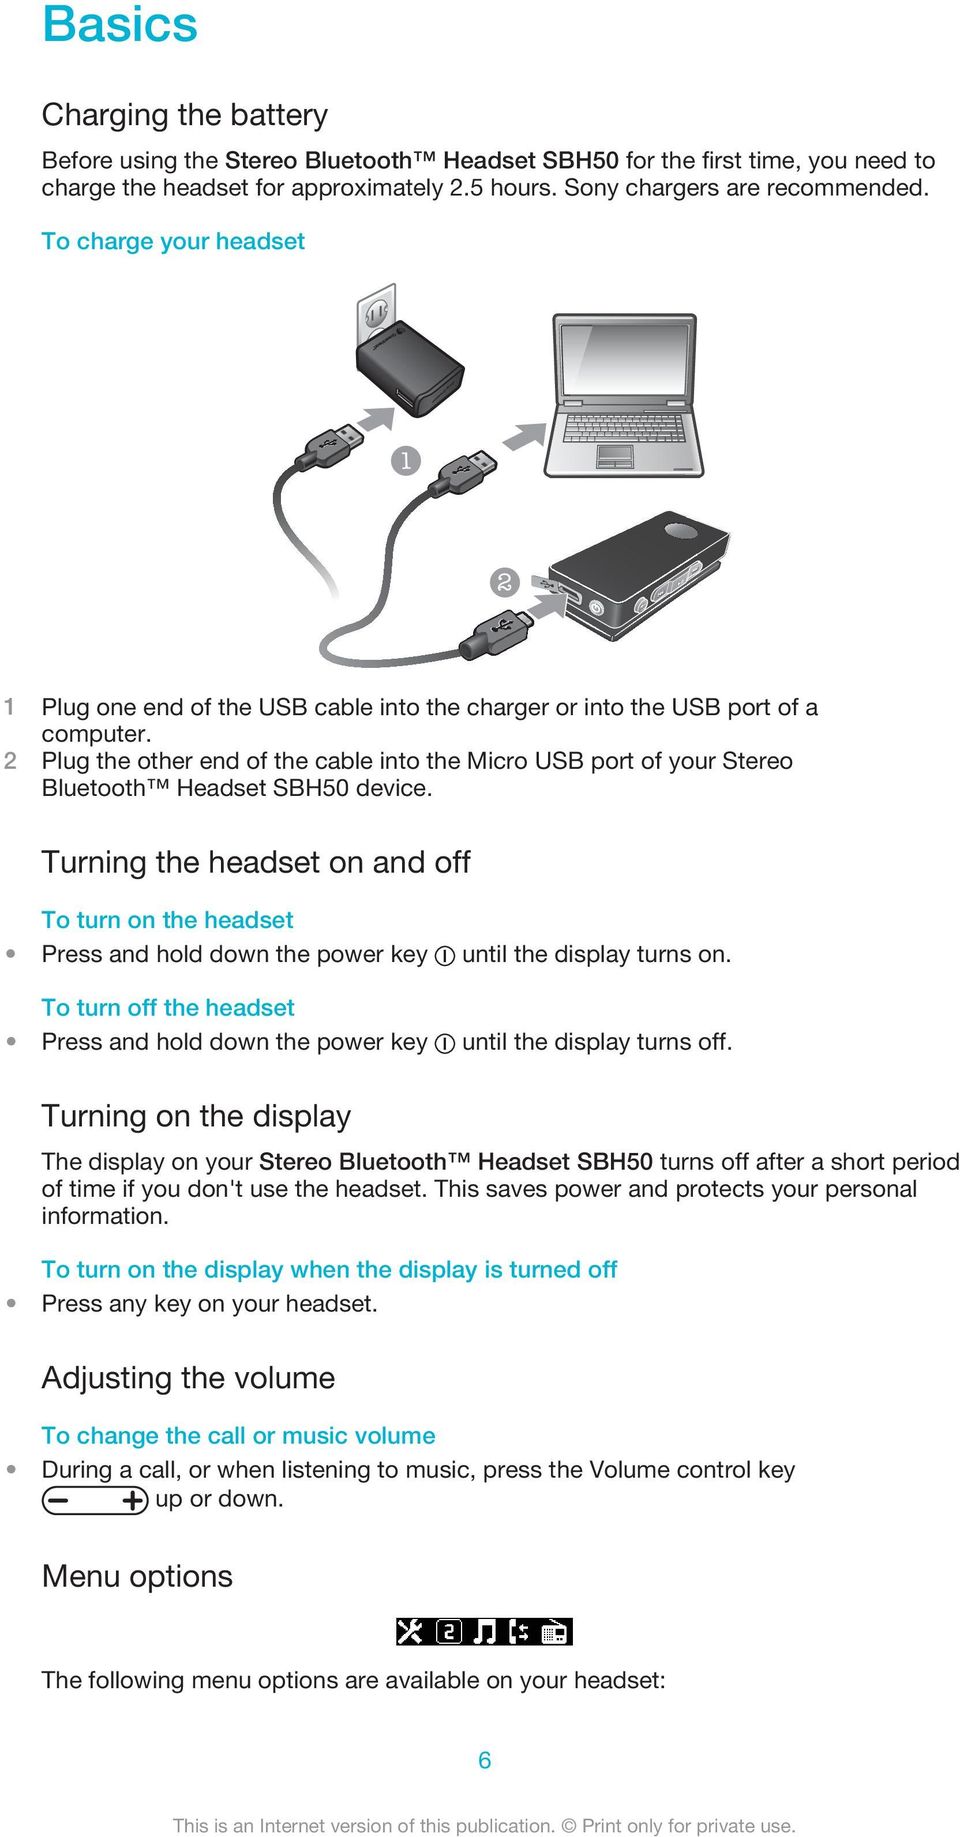 2 Plug the other end of the cable into the Micro USB port of your Stereo Bluetooth Headset SBH50 device.